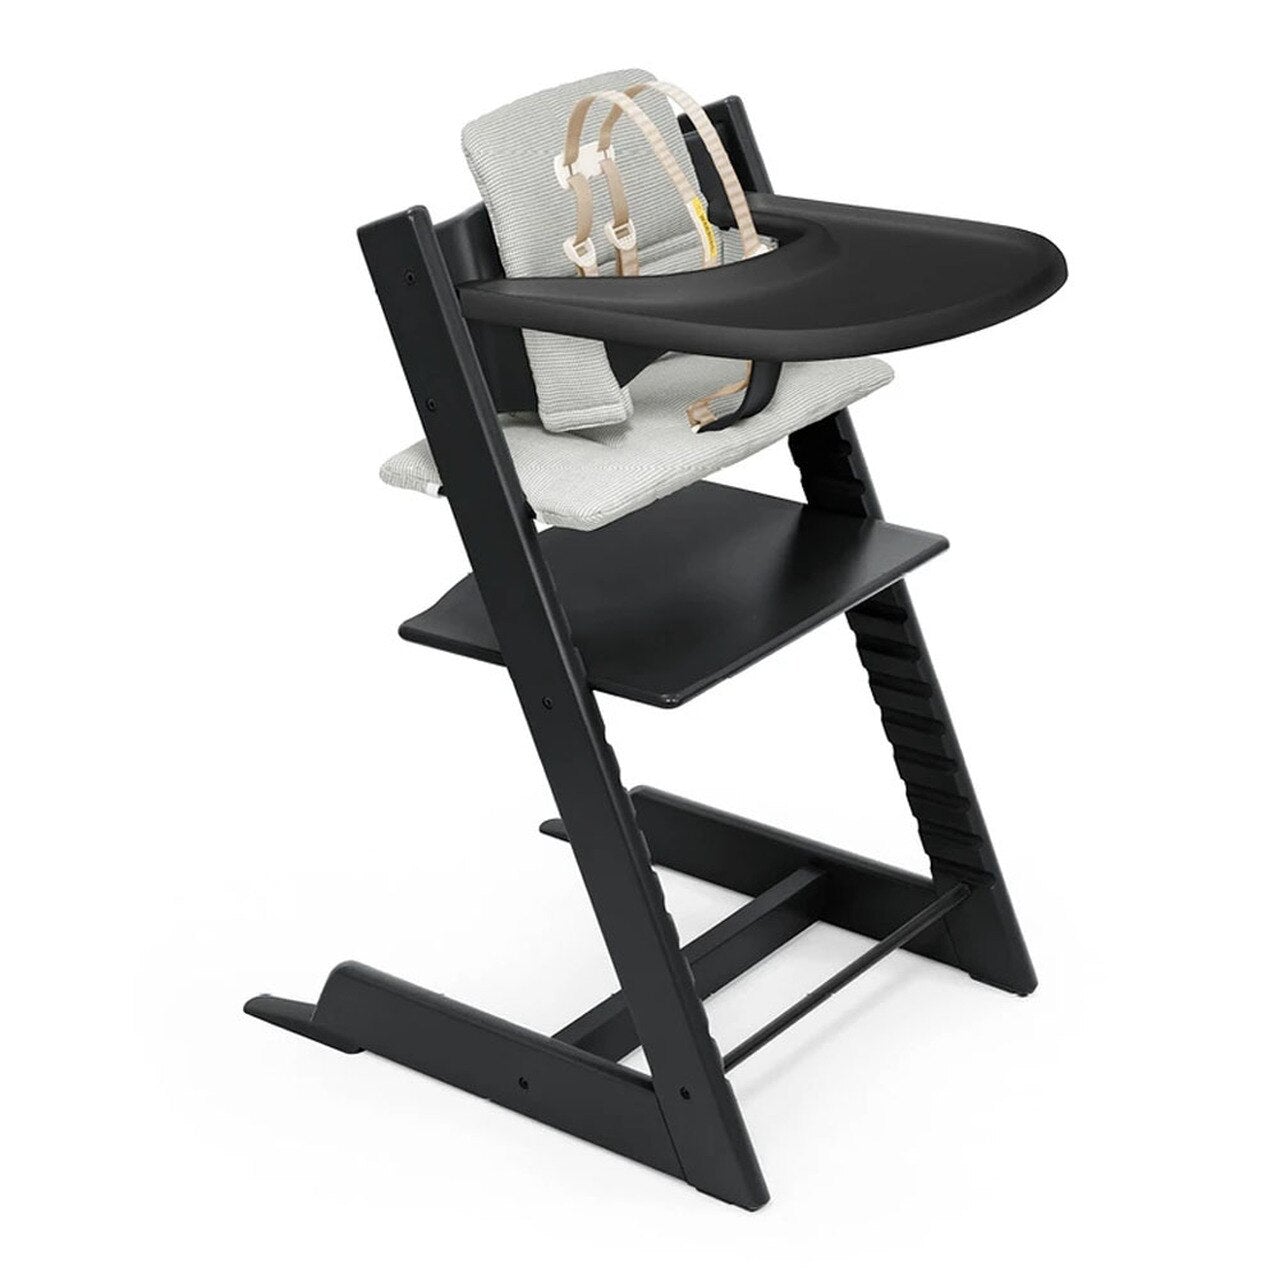 STOKKE Tripp Trapp High Chair Complete with Cushion and Tray - ANB Baby -$300 - $500